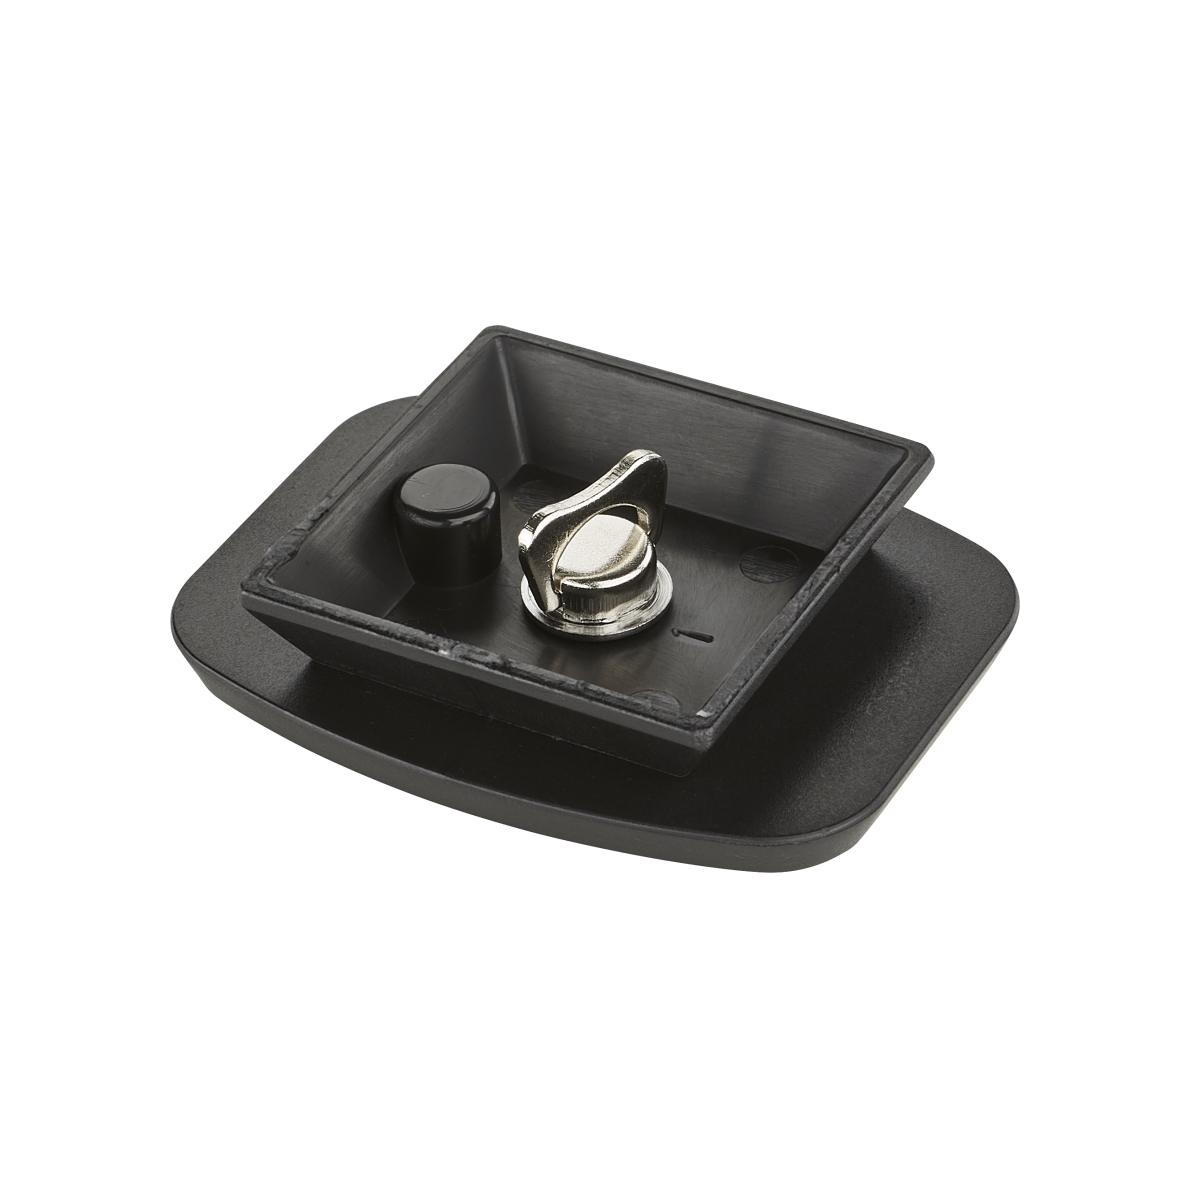 Walimex Quick Release Plate for WT-3530